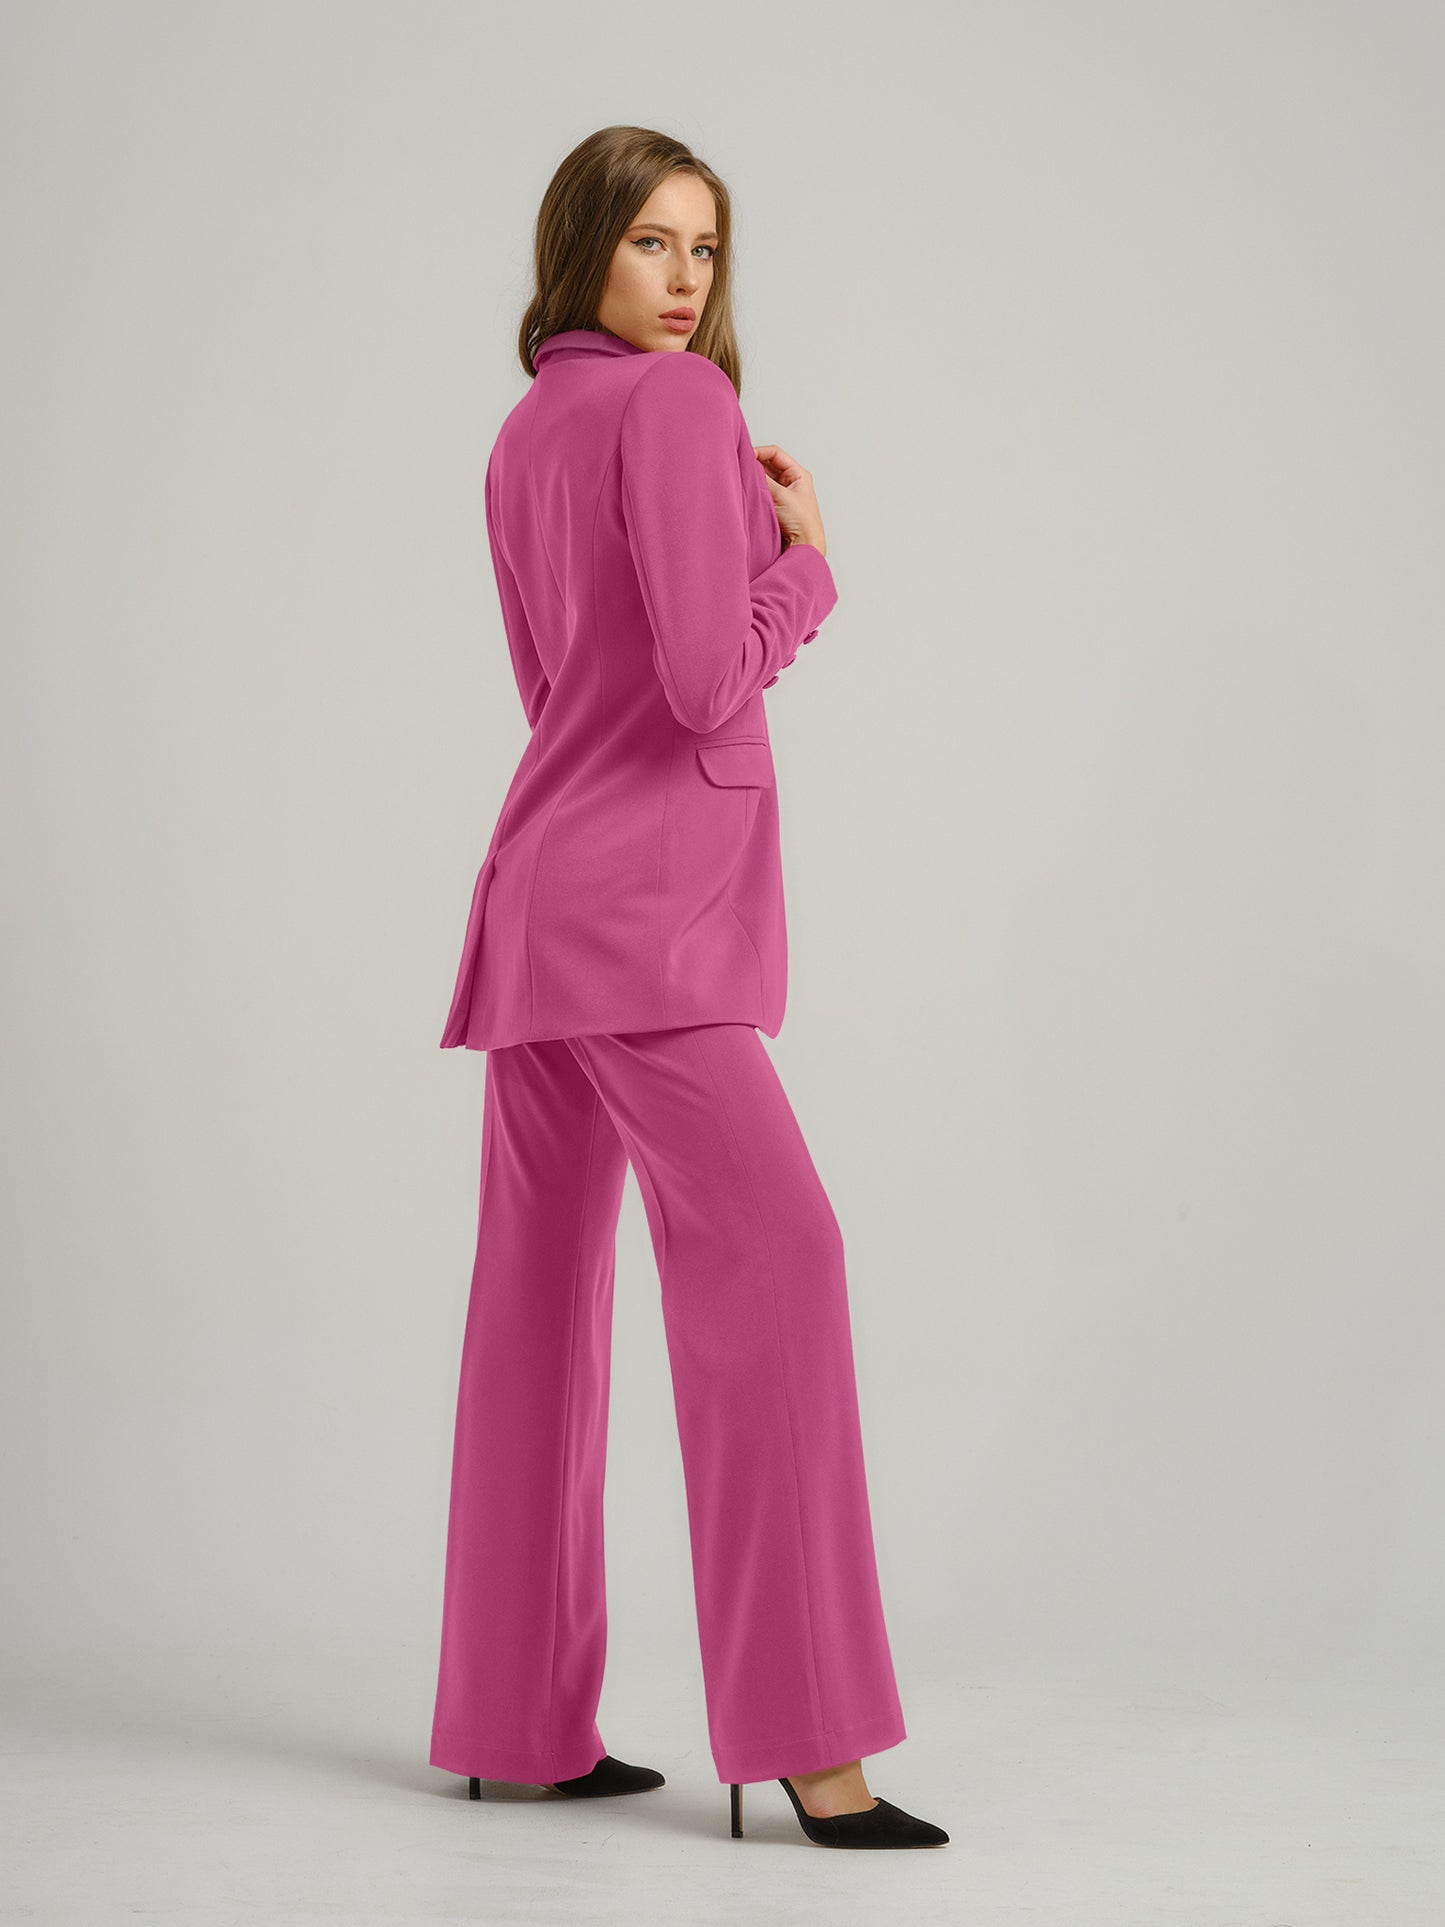 Tia Dorraine Sweet Desire High-Waist Flared Trousers These classic flared trousers would fit perfectly in any woman’s capsule wardrobe. With their full length, they can be worn with heeled boots or high heels in the office. The trousers feature a classic